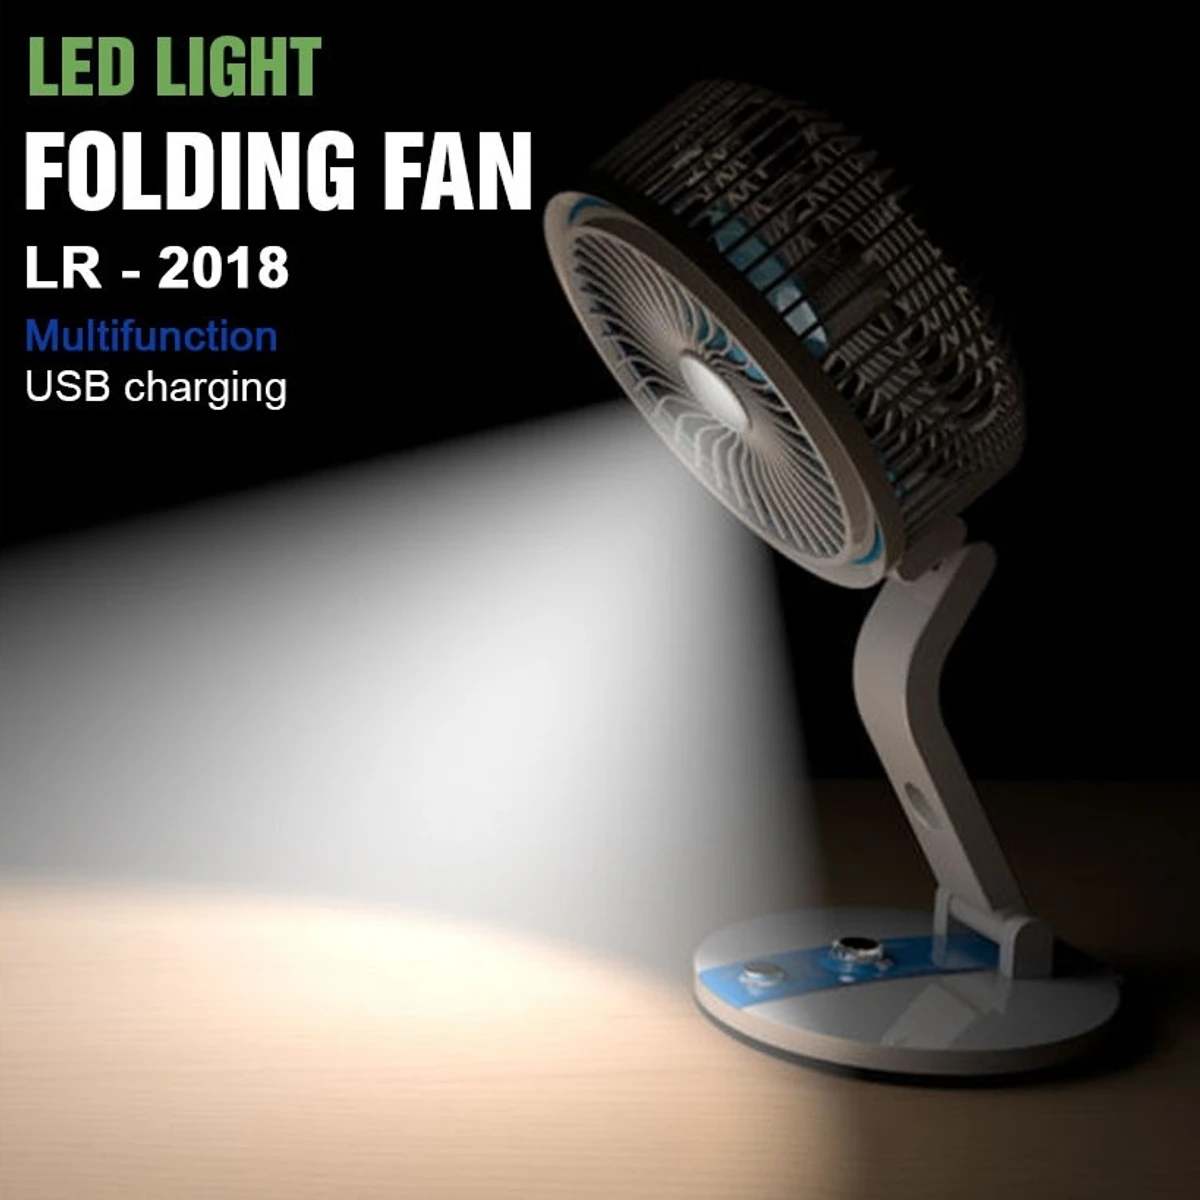 Rechargeable Folding Table Fan with Led Light